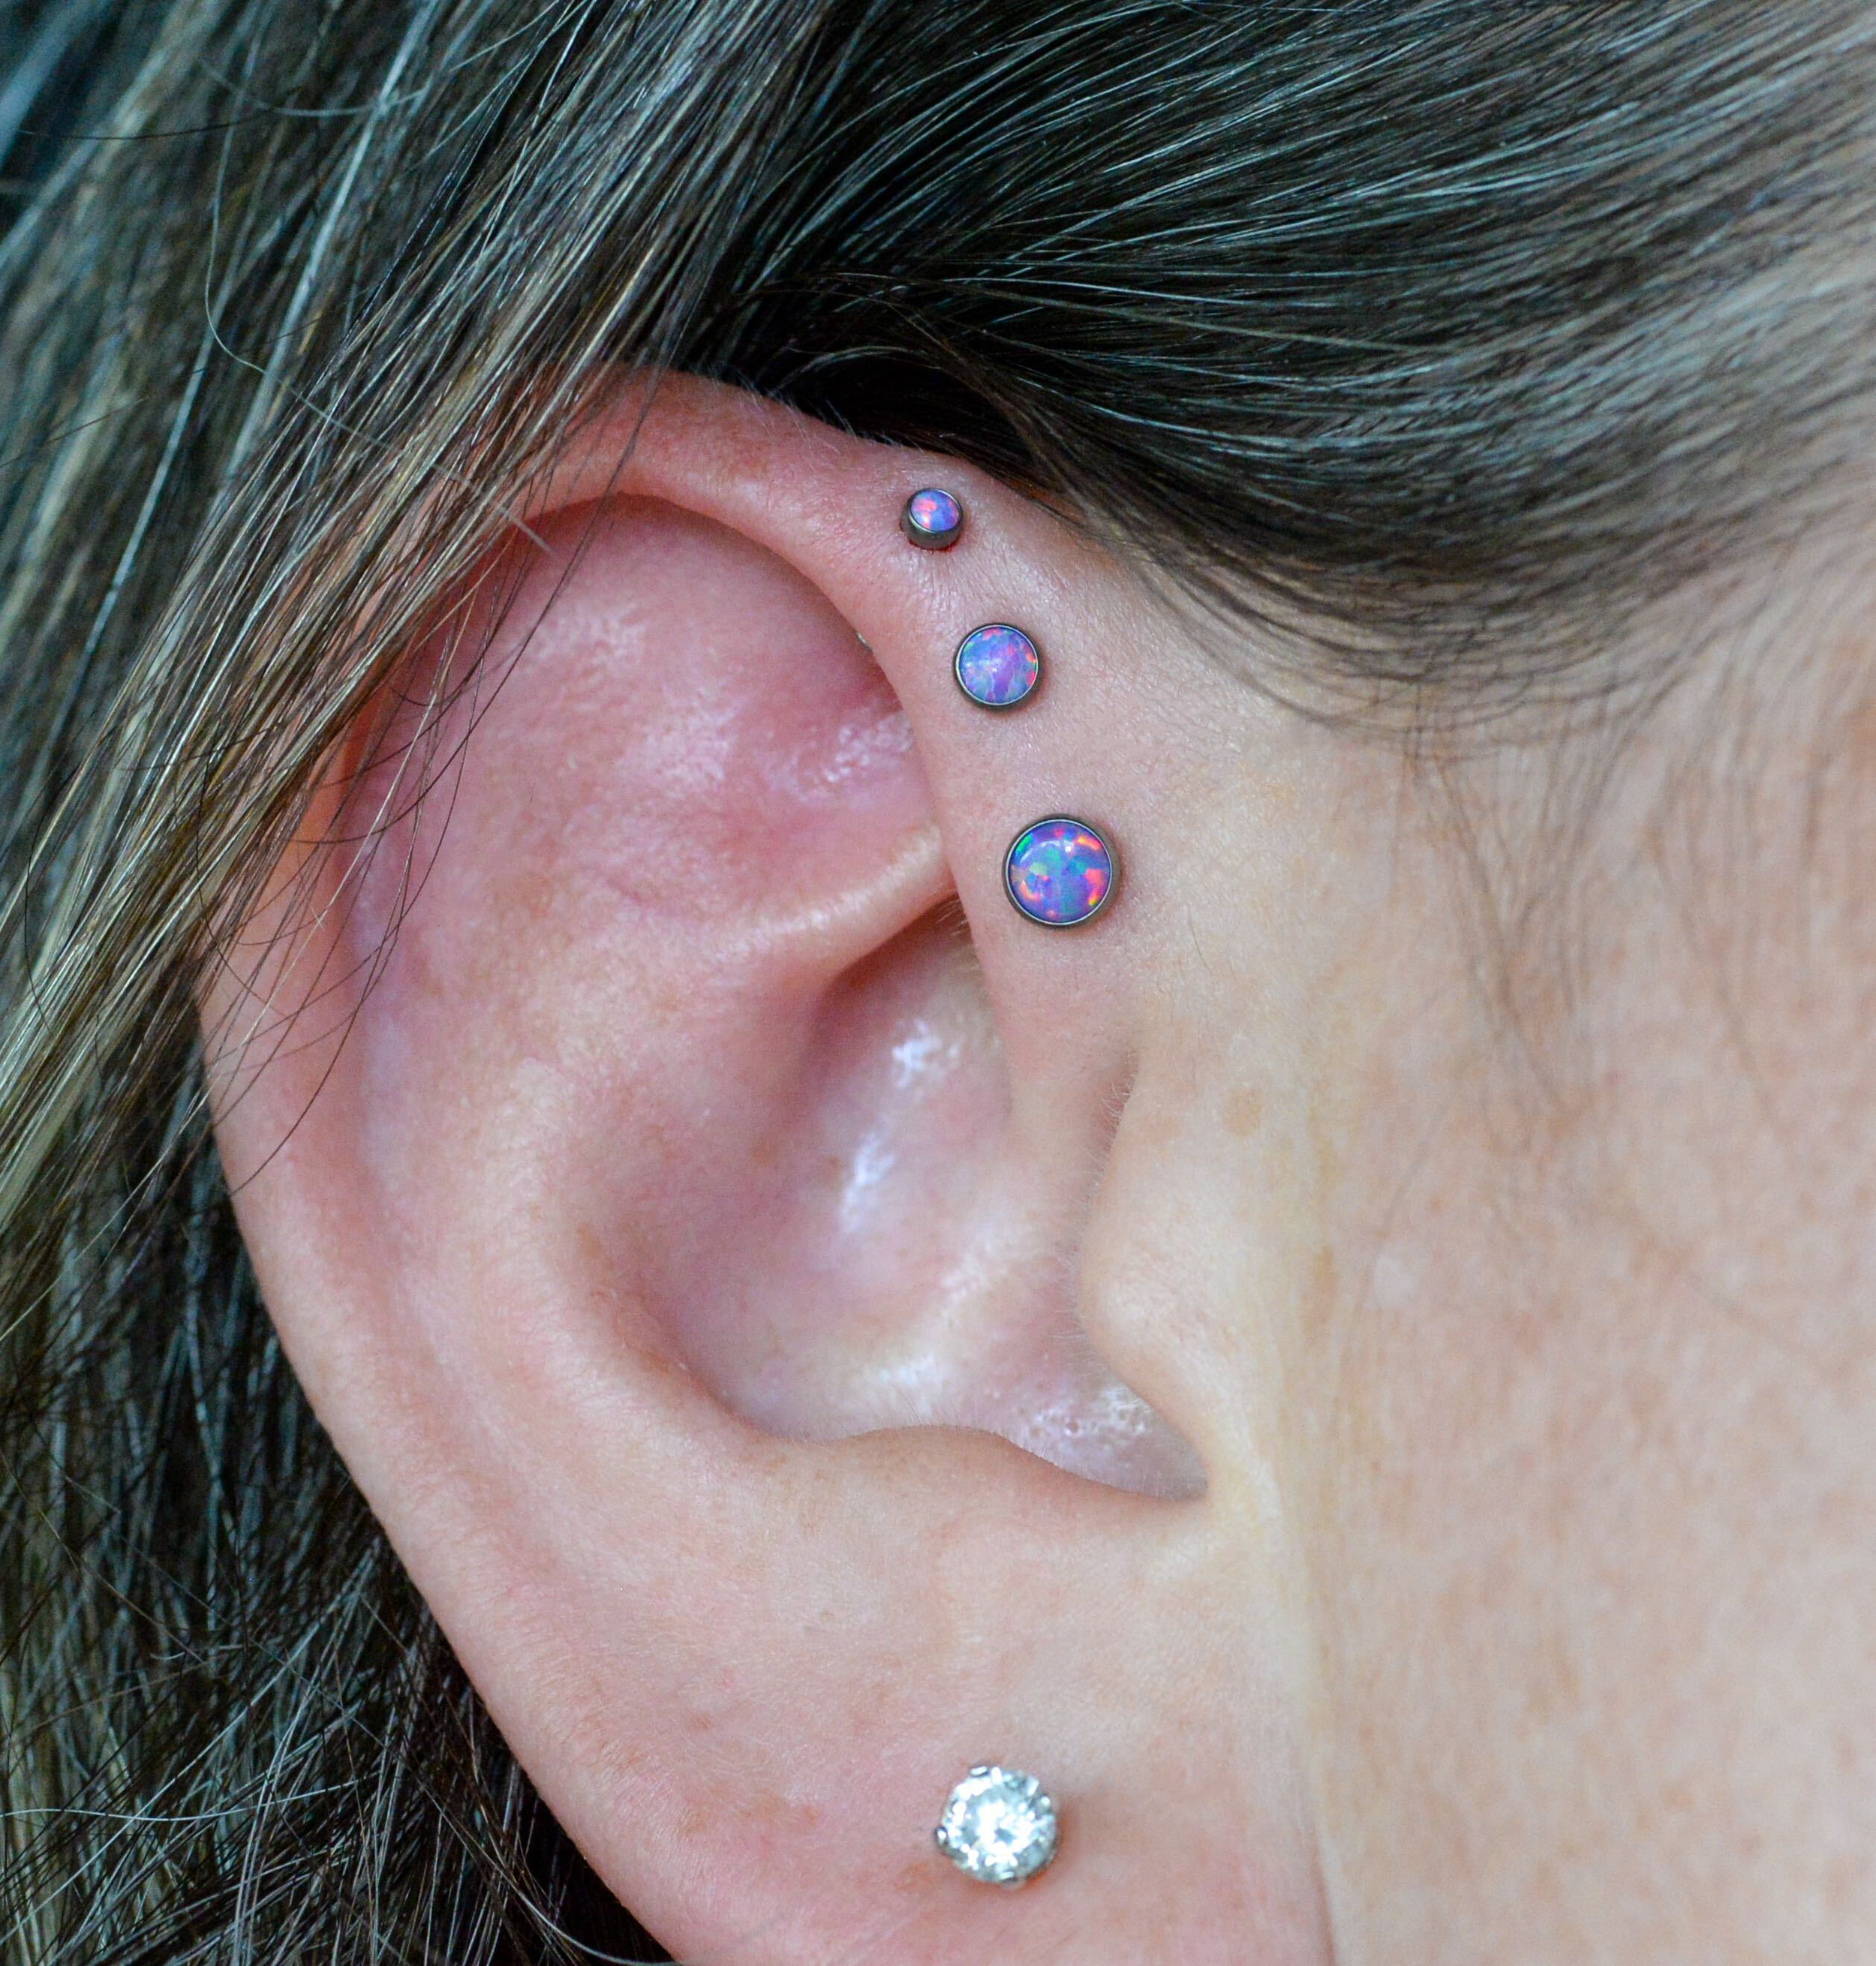 Caring for new piercings